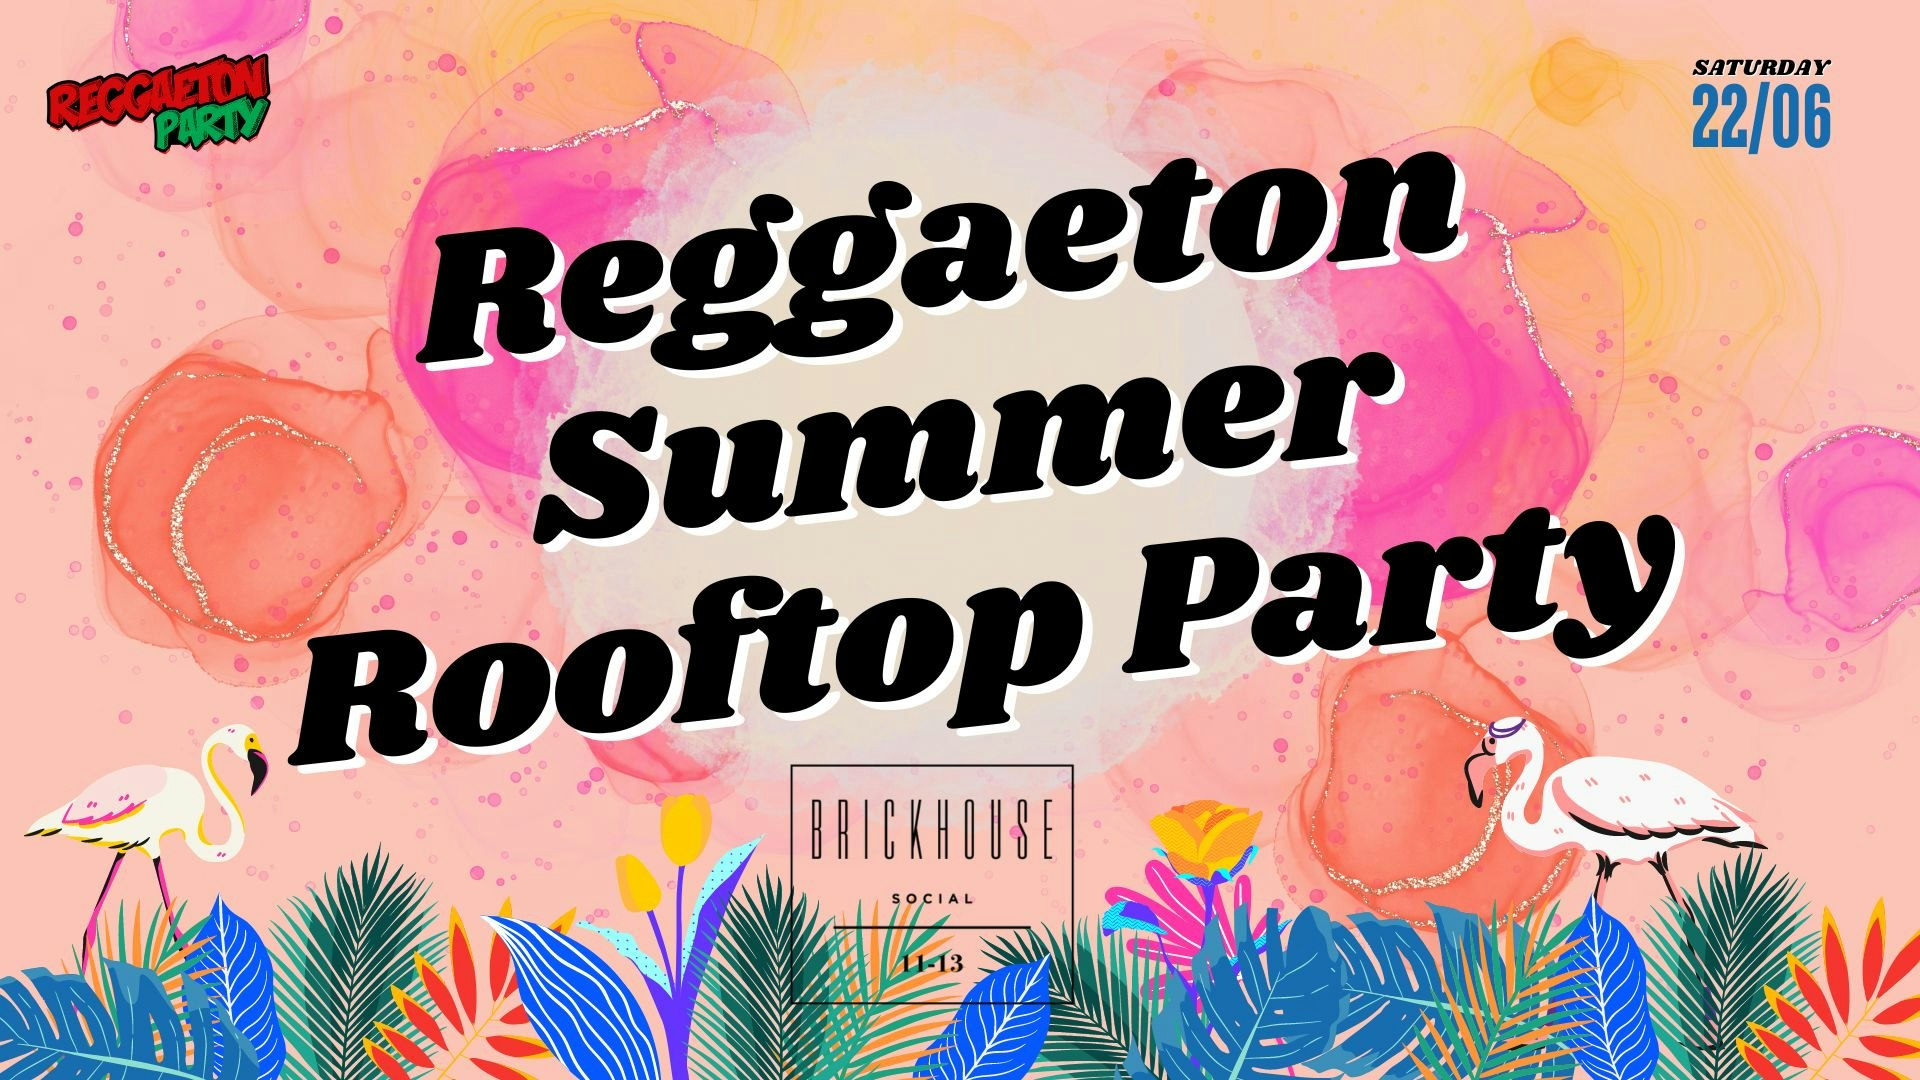 Reggaeton Rooftop Party (Manchester)